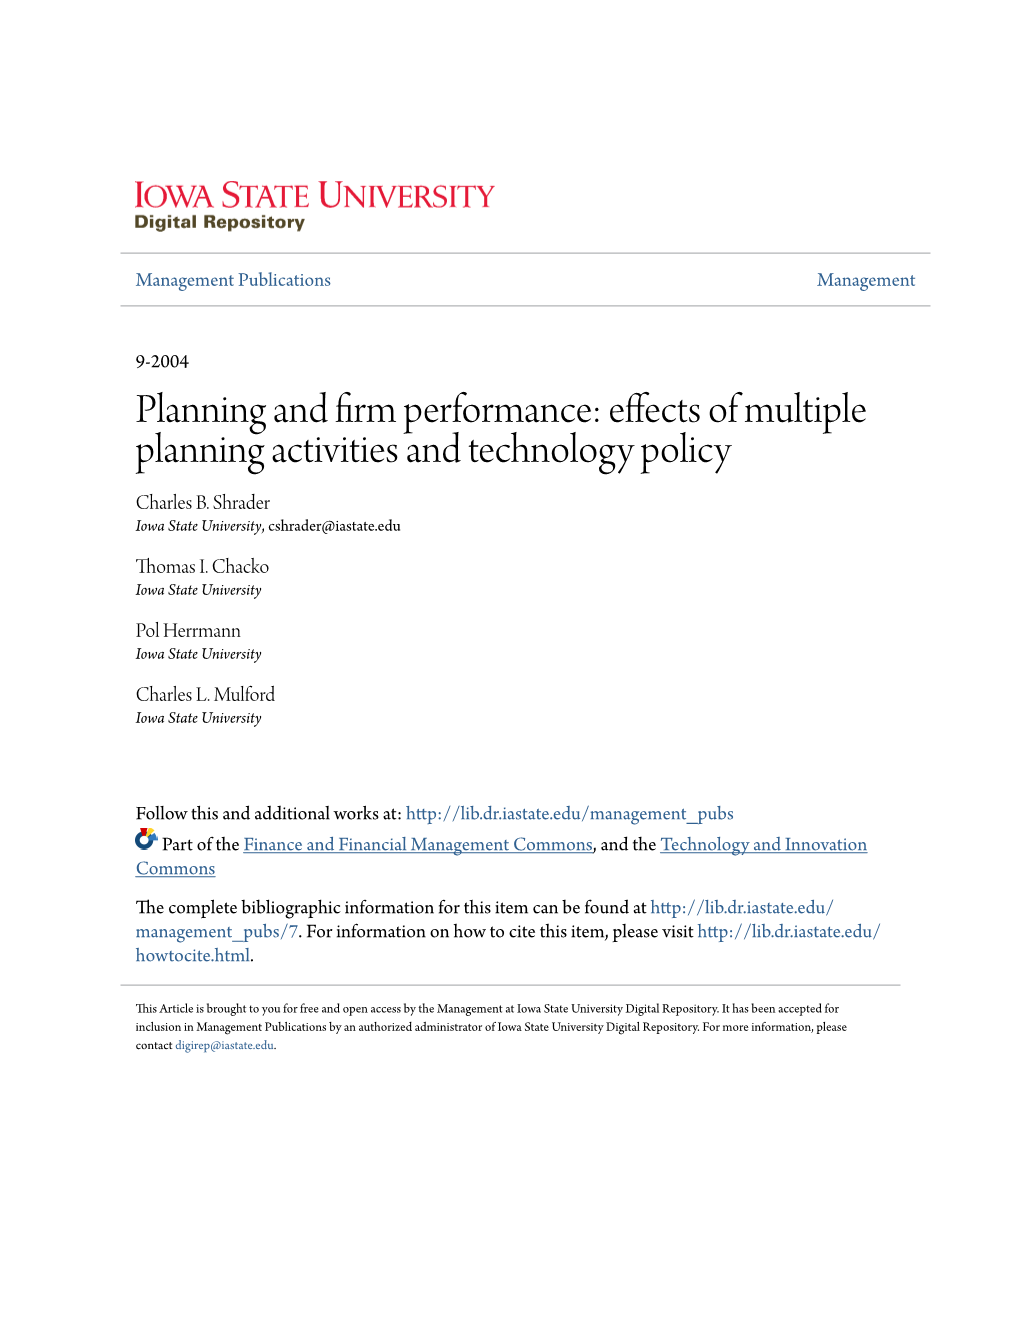 Effects of Multiple Planning Activities and Technology Policy Charles B